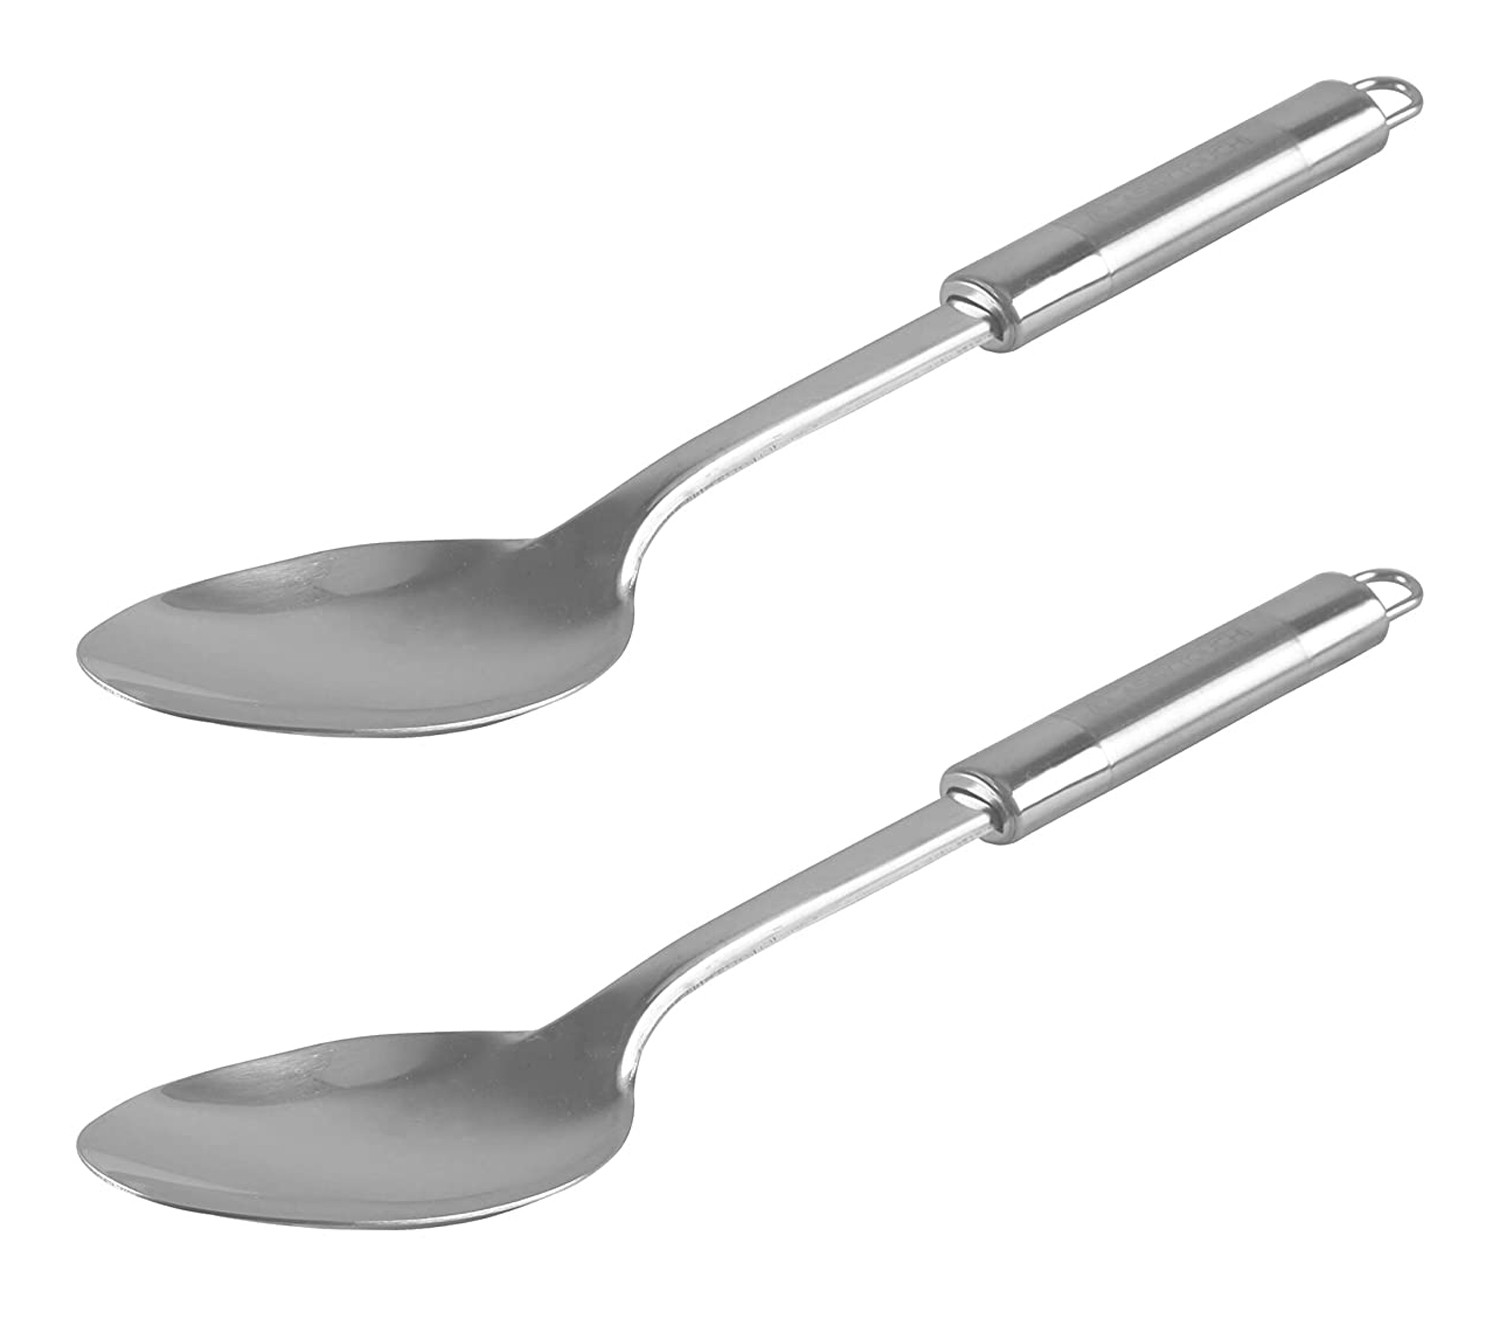 Kuber Industries Stainless Steel Solid Cooking Spoon, Serving Spoon, Kitchen Spoons, Basting Spoon for Kitchen (Silver)